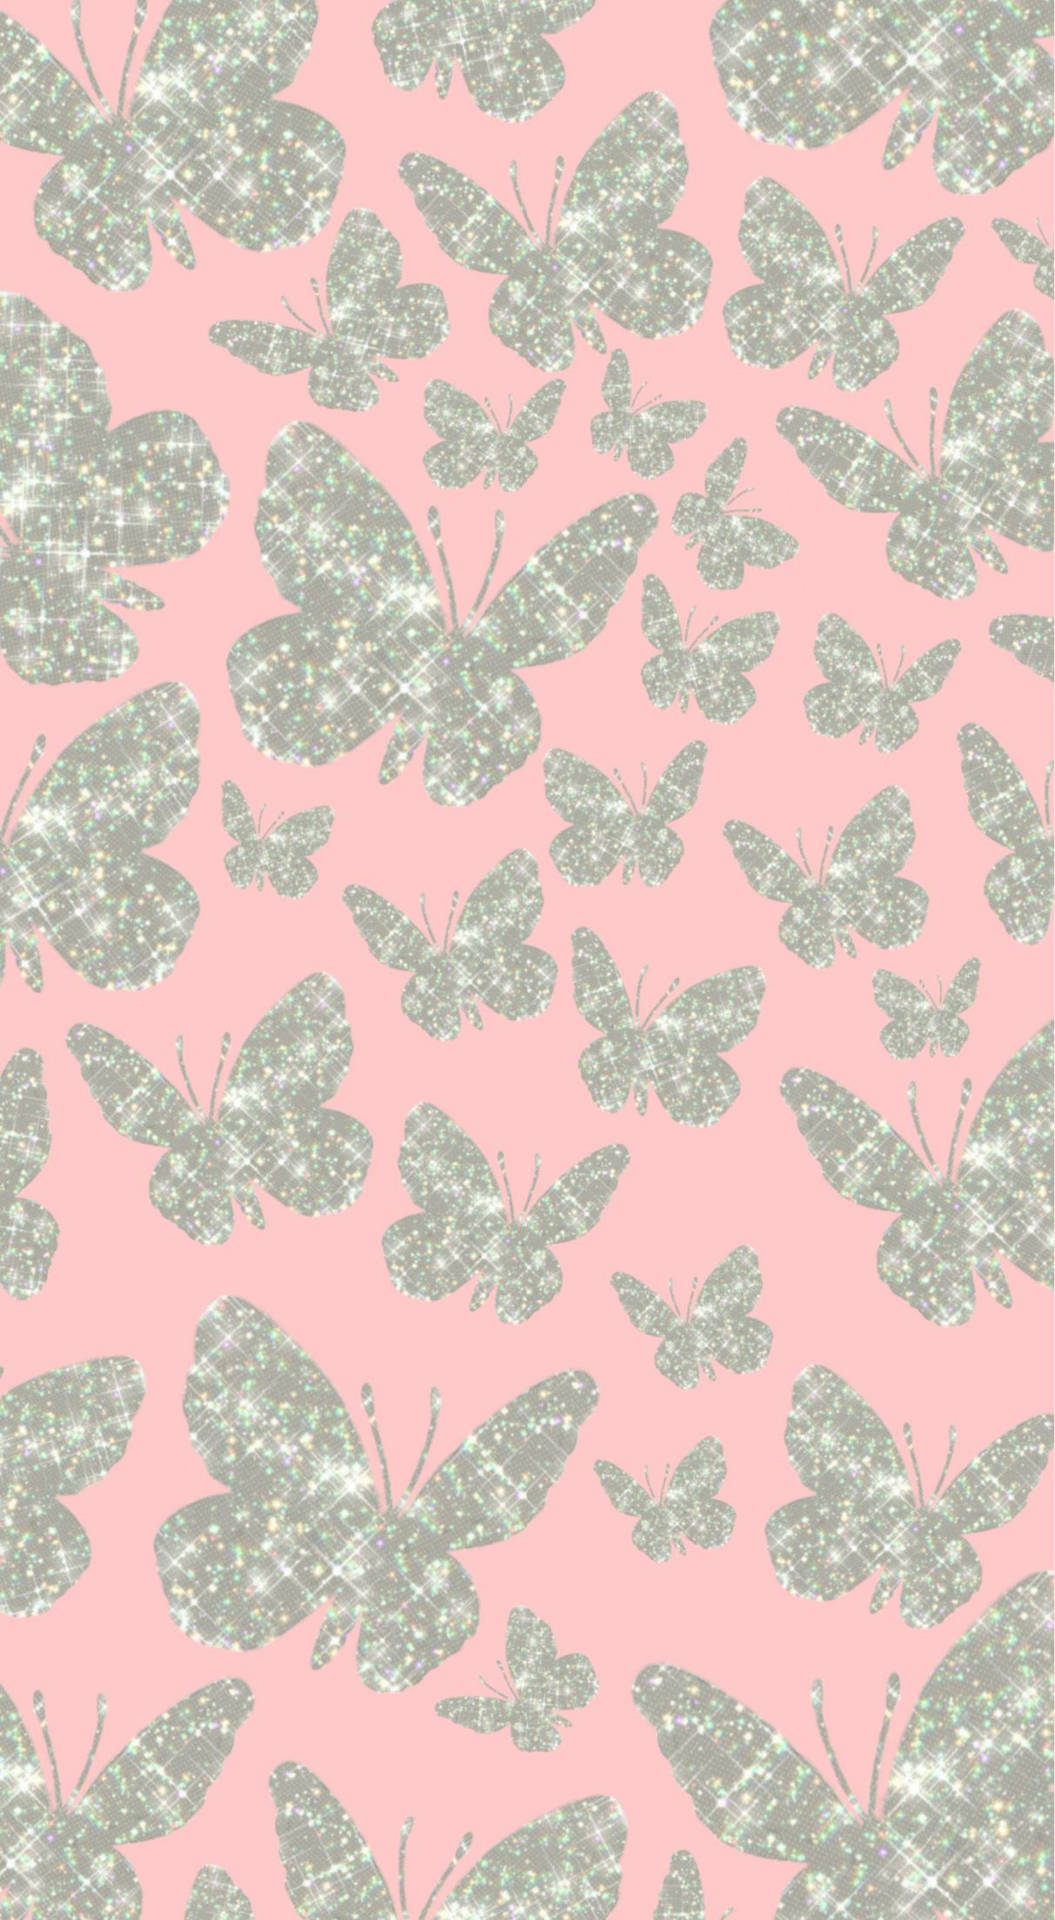 Green Butterflies For Y2k Background